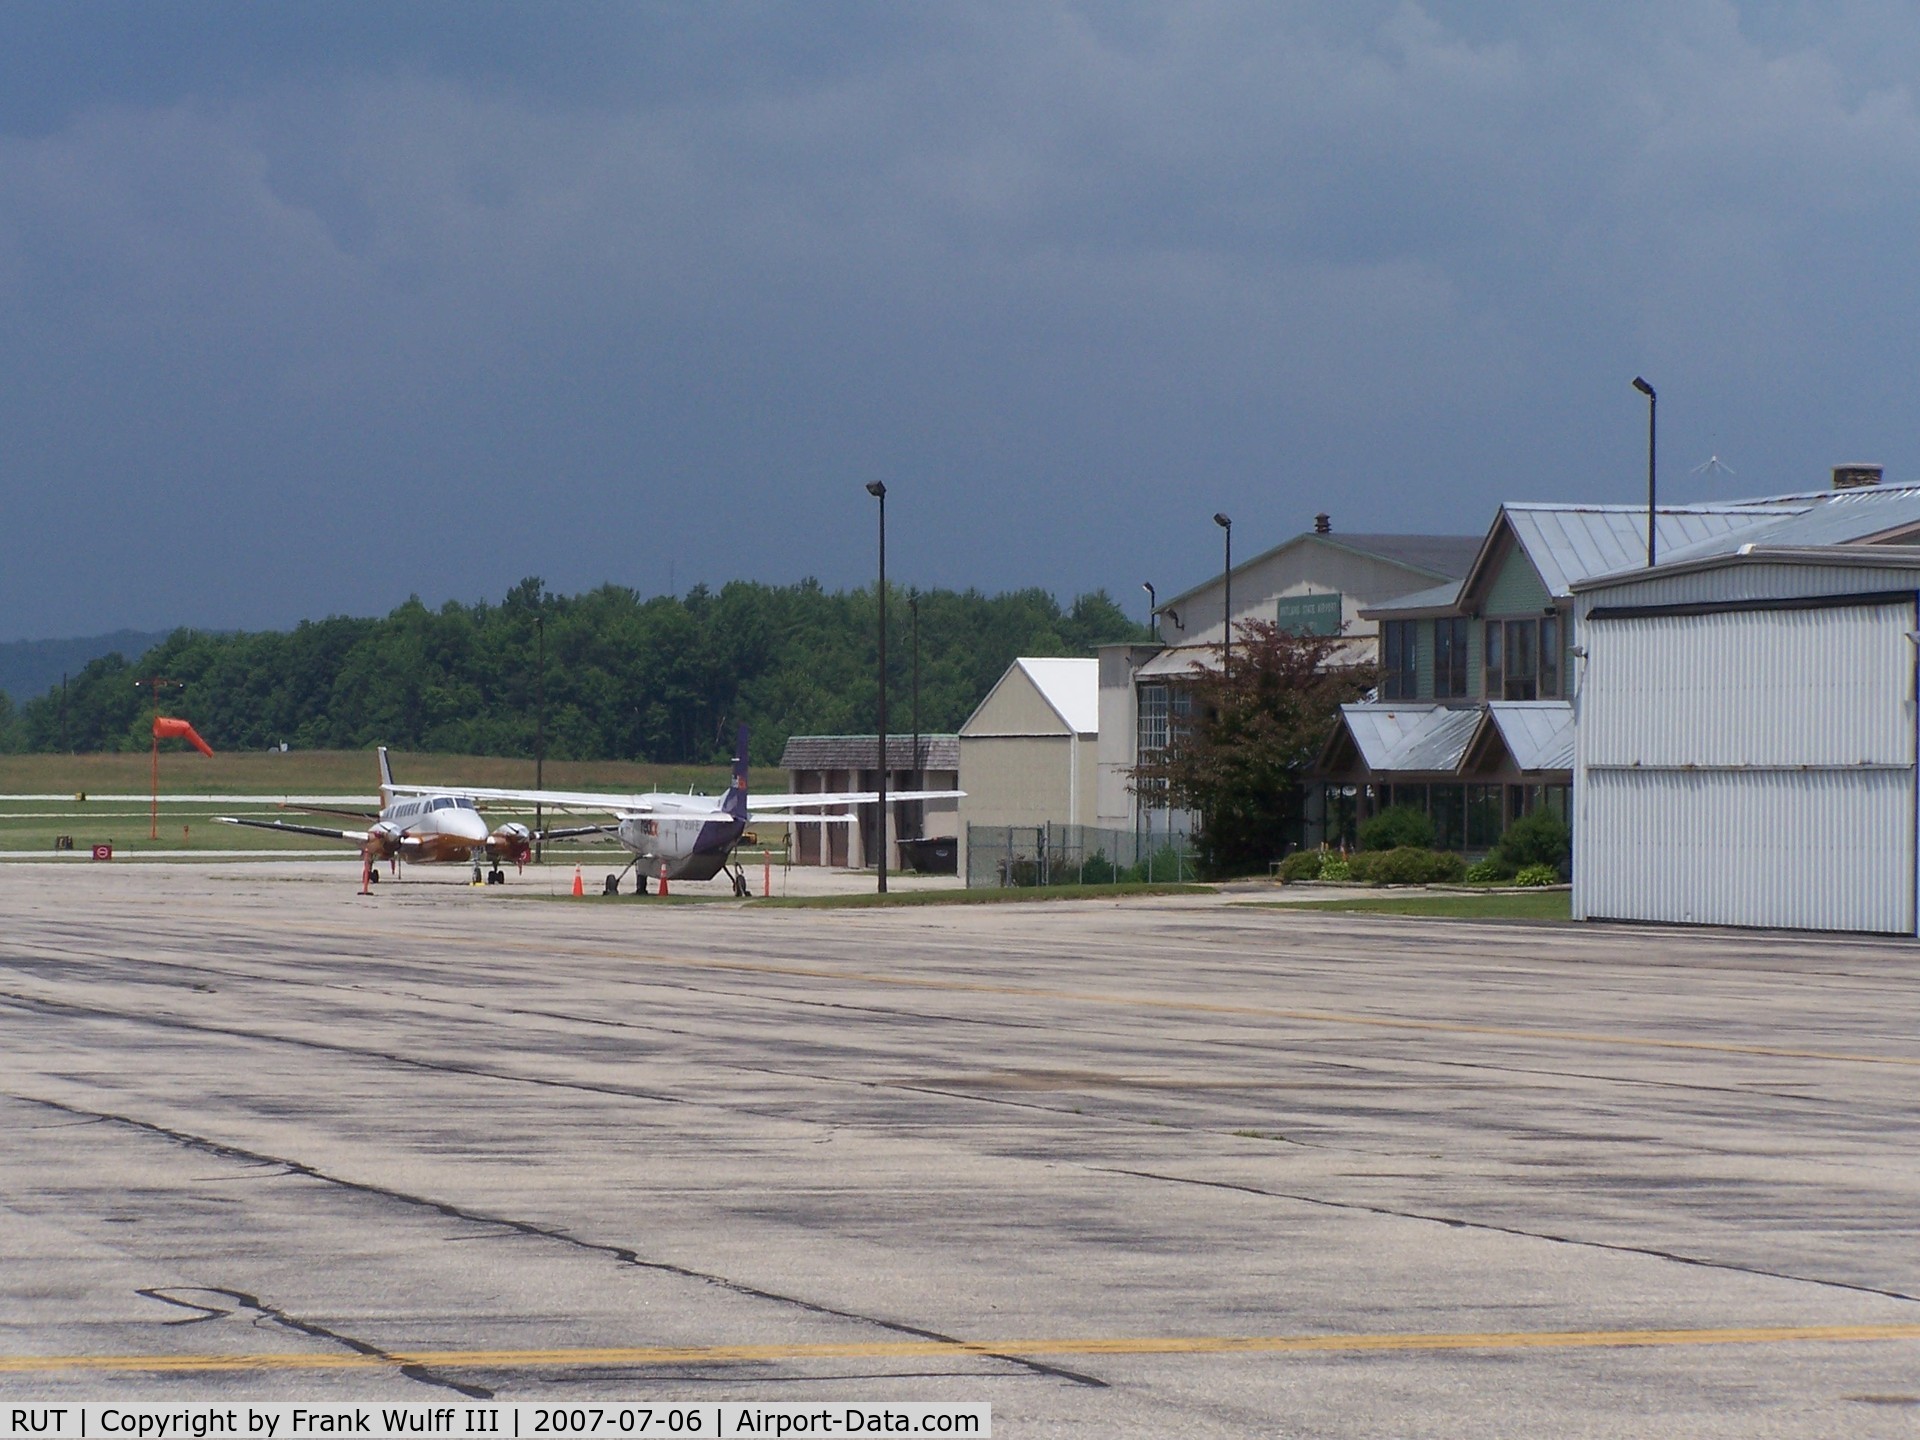 Rutland - Southern Vermont Regional Airport (RUT) - Taken on the tie down area. This is the Backside of the terminal. In the distance you can see the Civil Air Patrol hangars.